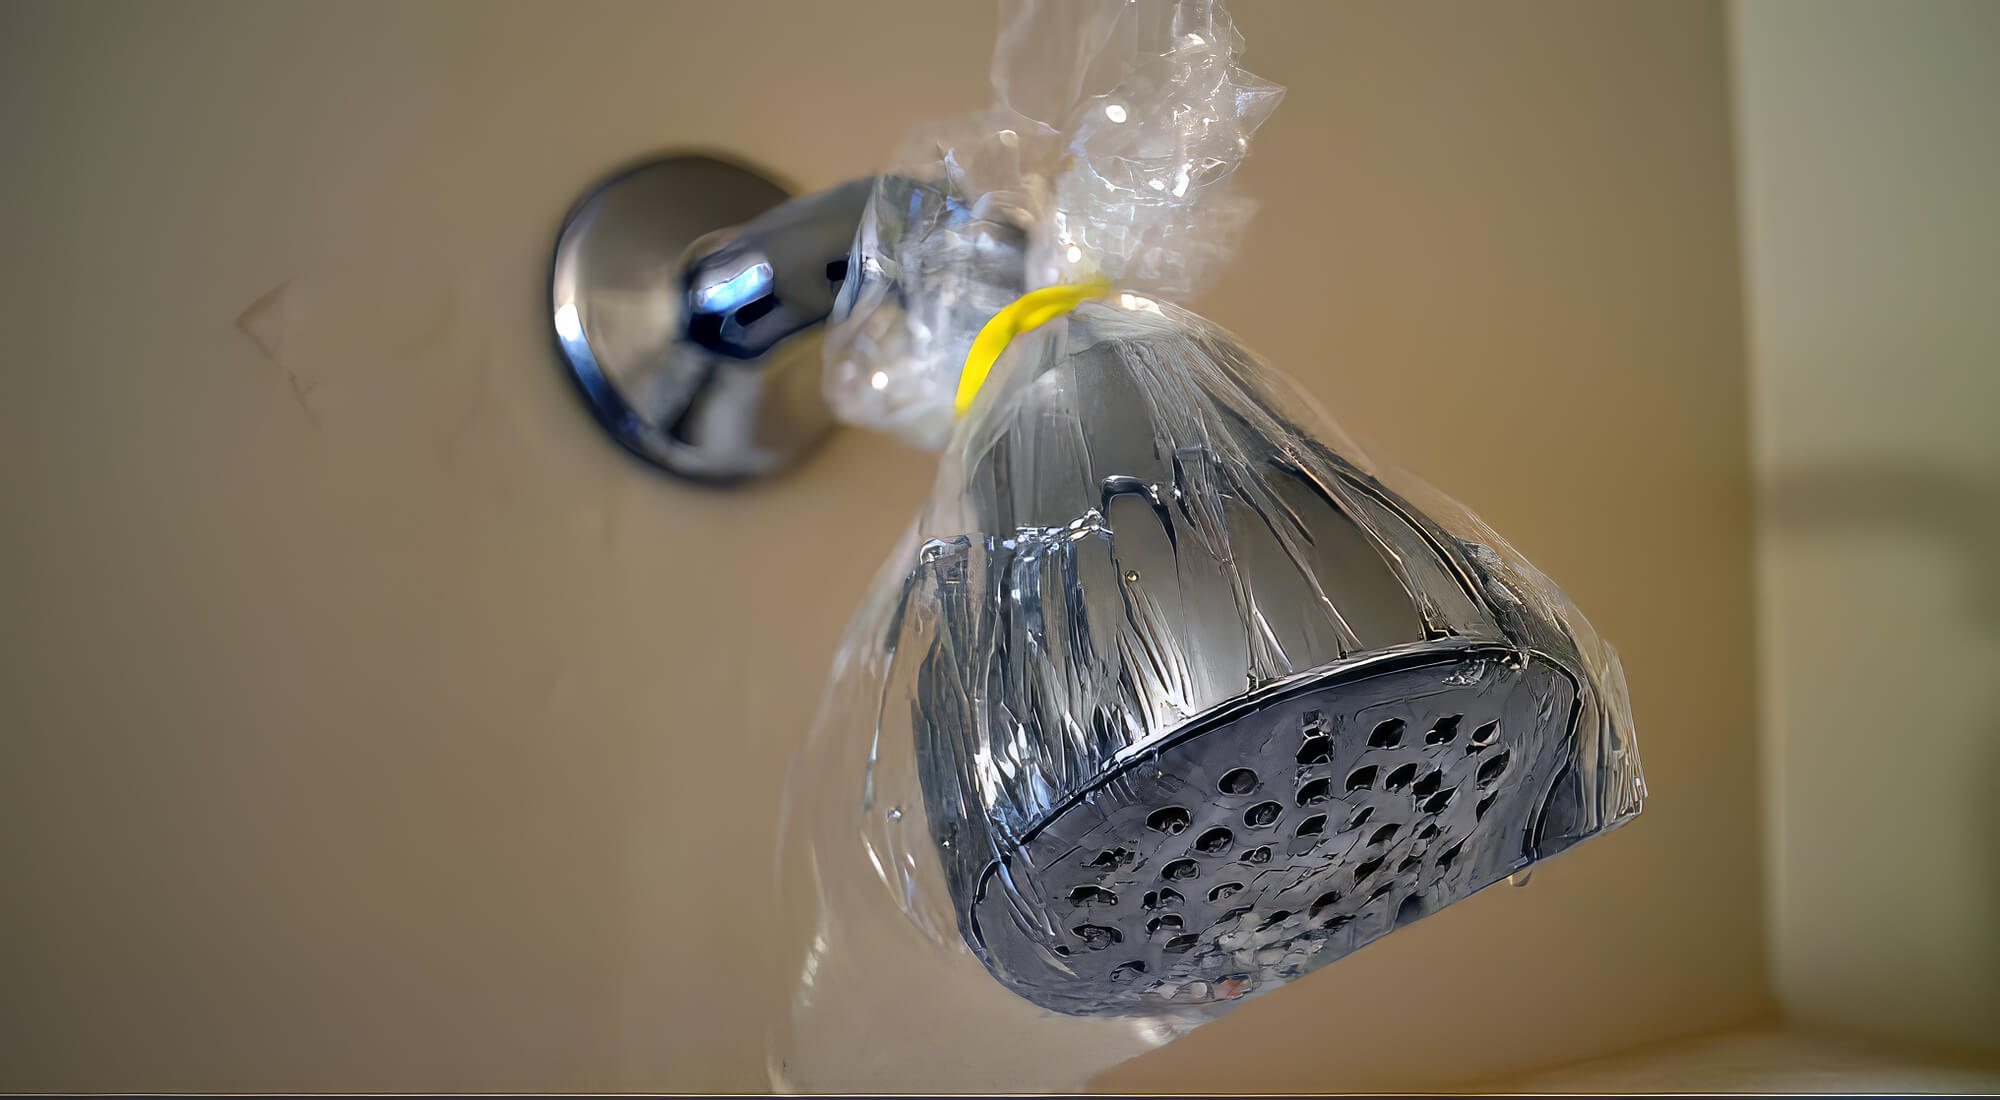 How To Clean Showerhead With Vinegar And Baking Soda